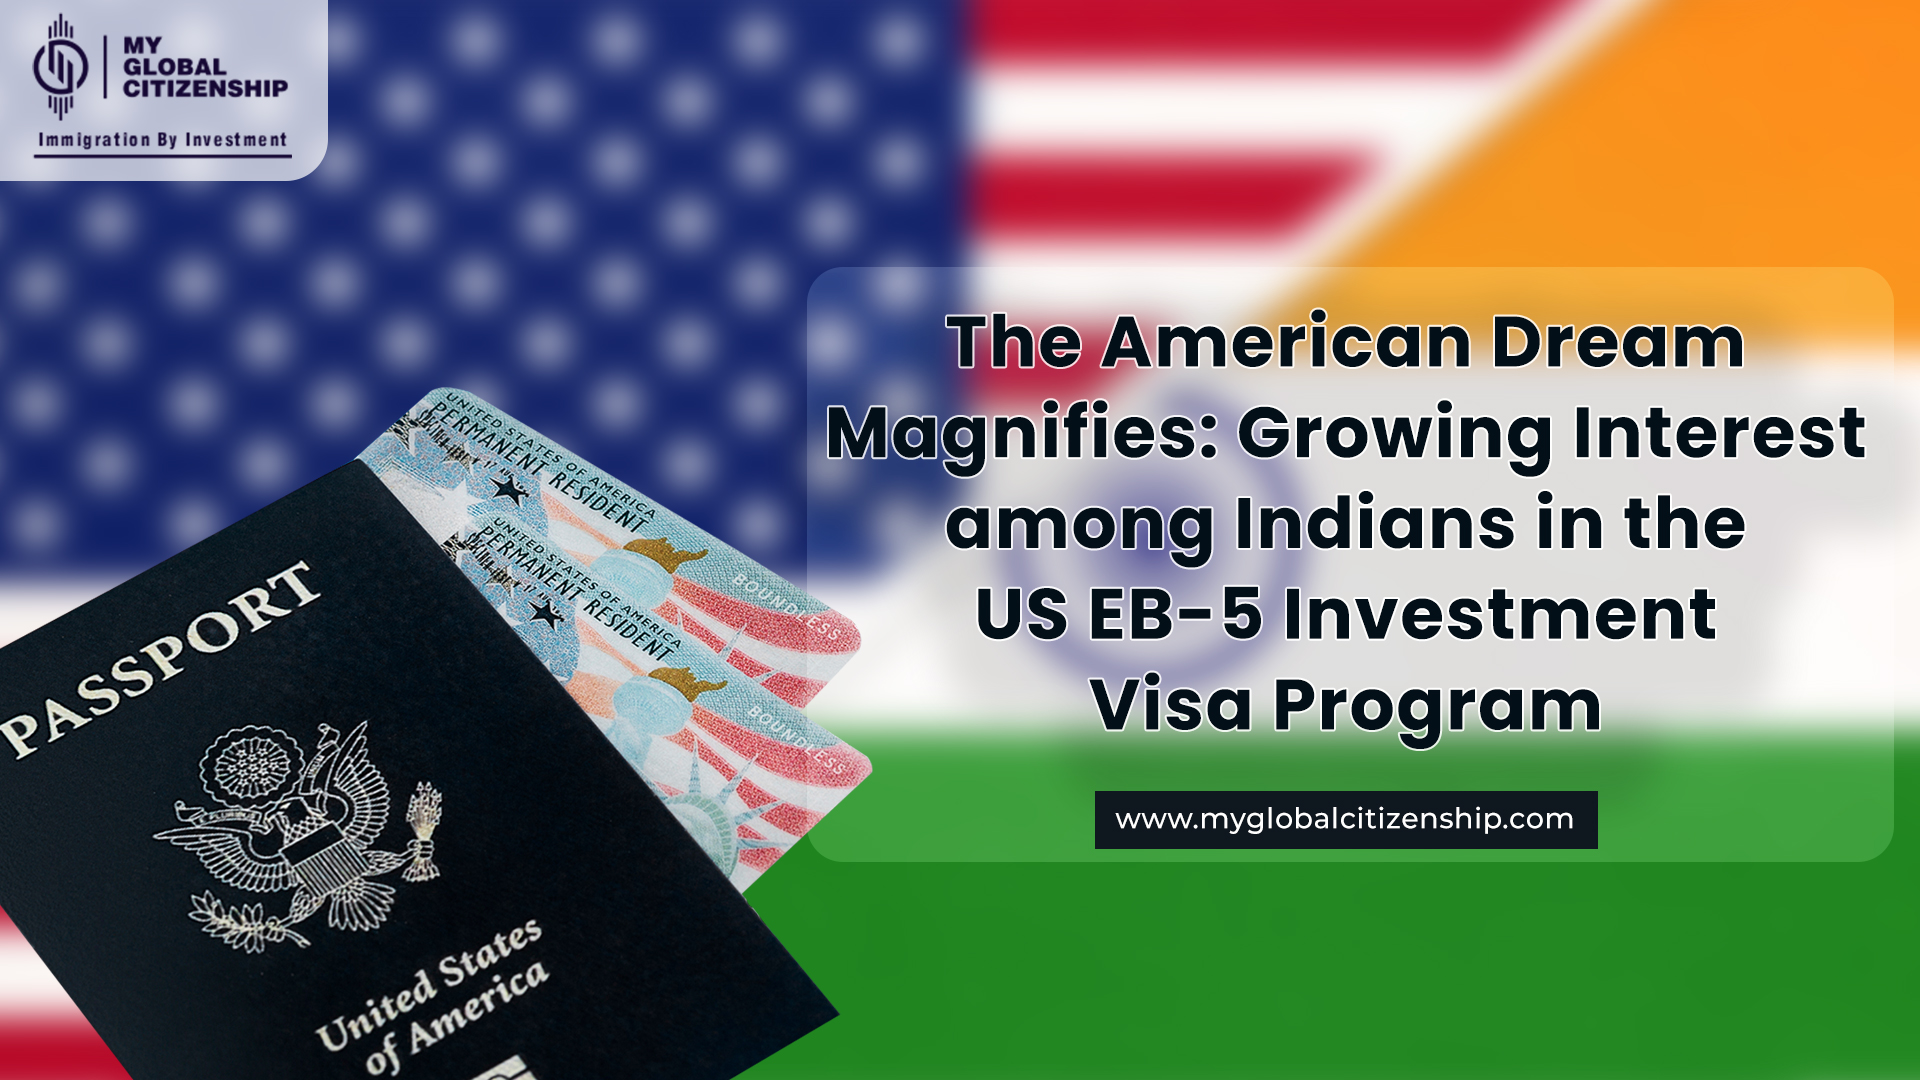 The American Dream Magnifies: Growing Interest among Indians in the US EB-5 Investment Visa Program